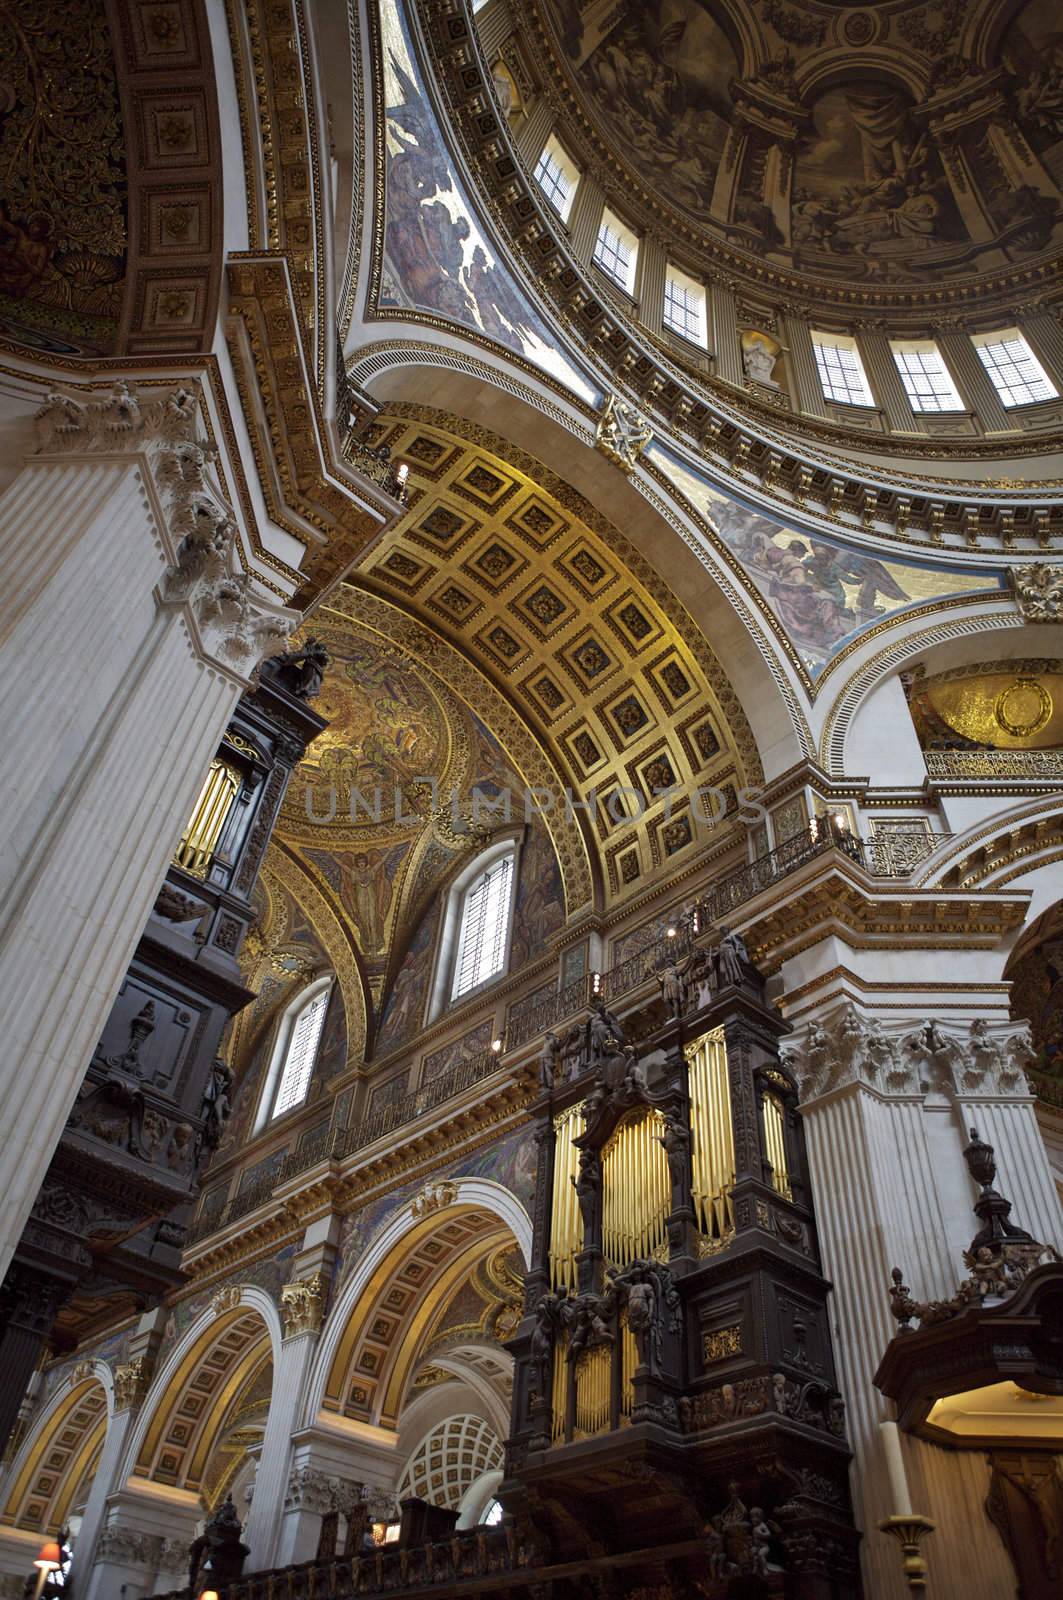 Church interior with ancient fresco and paintings in the interior of the dome of St Paul's